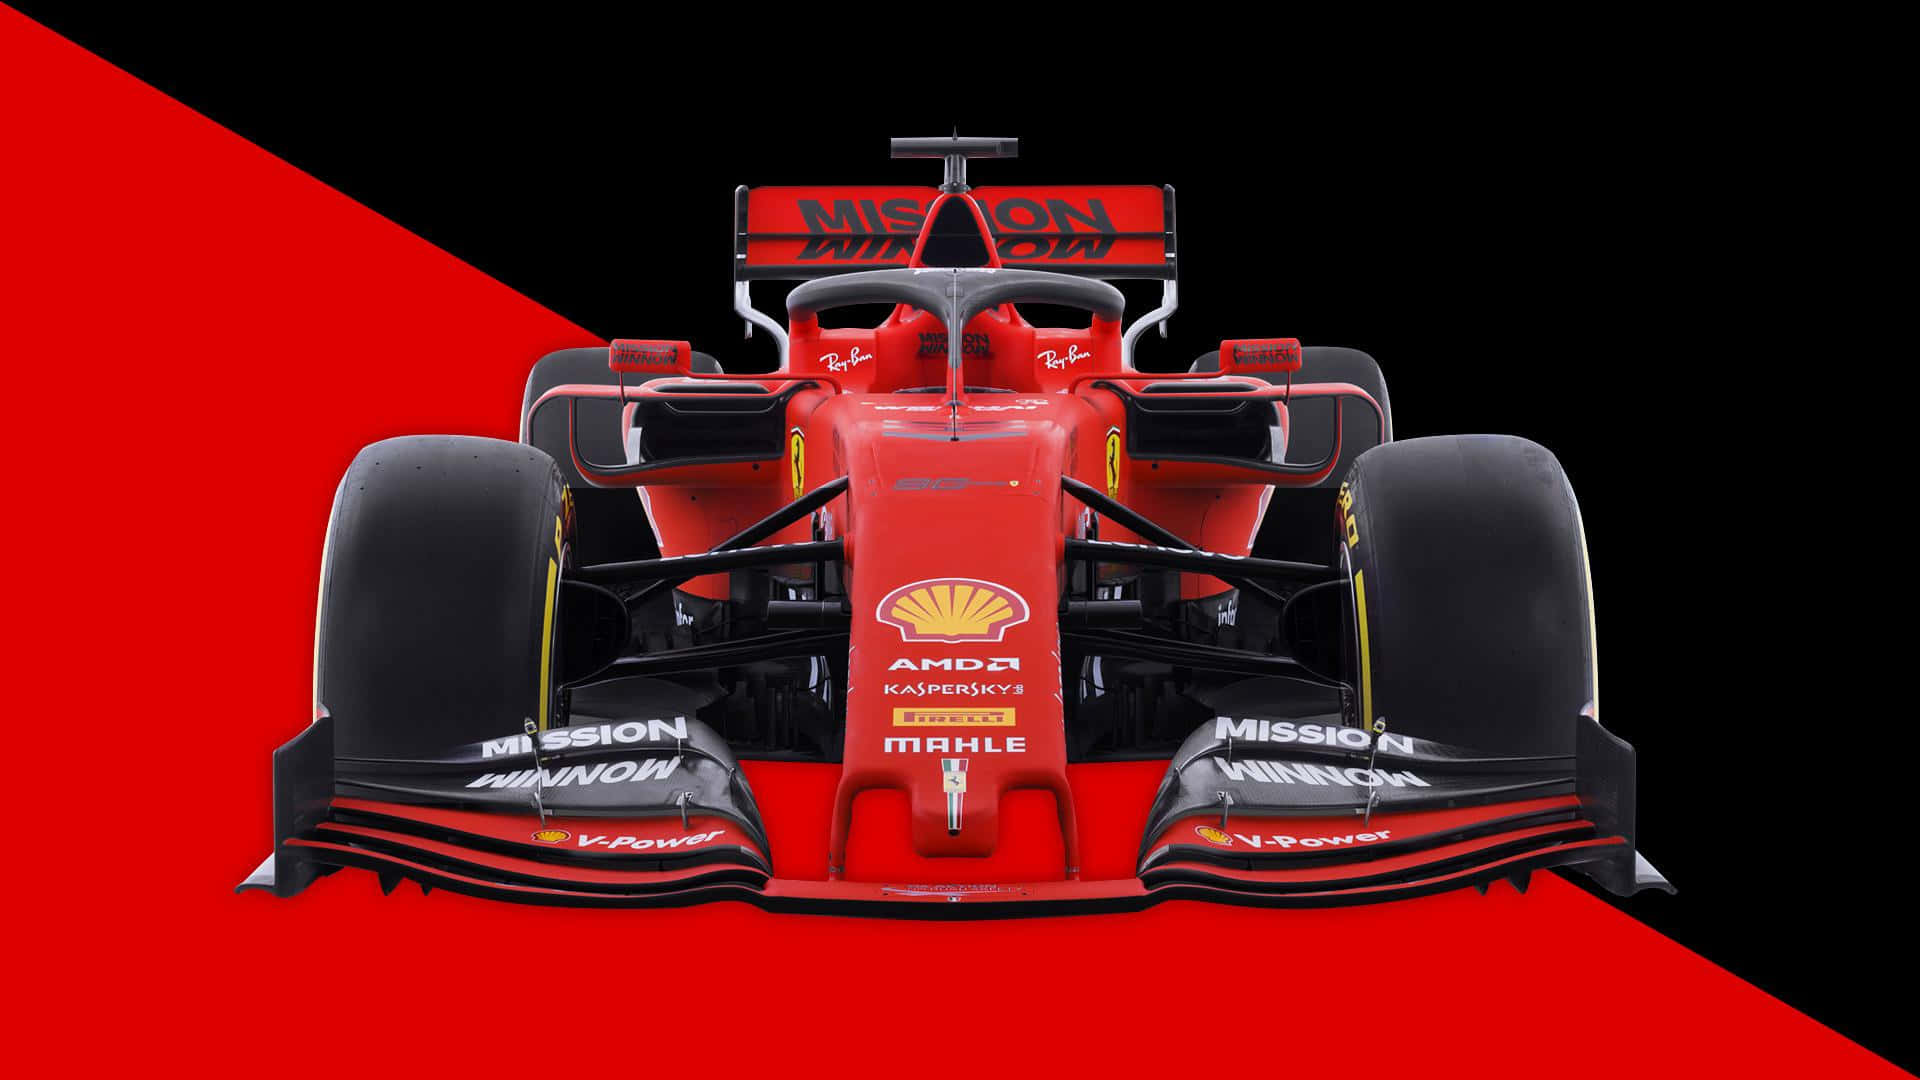 F1 Game Race Car Red And Black Aesthetic Wallpaper